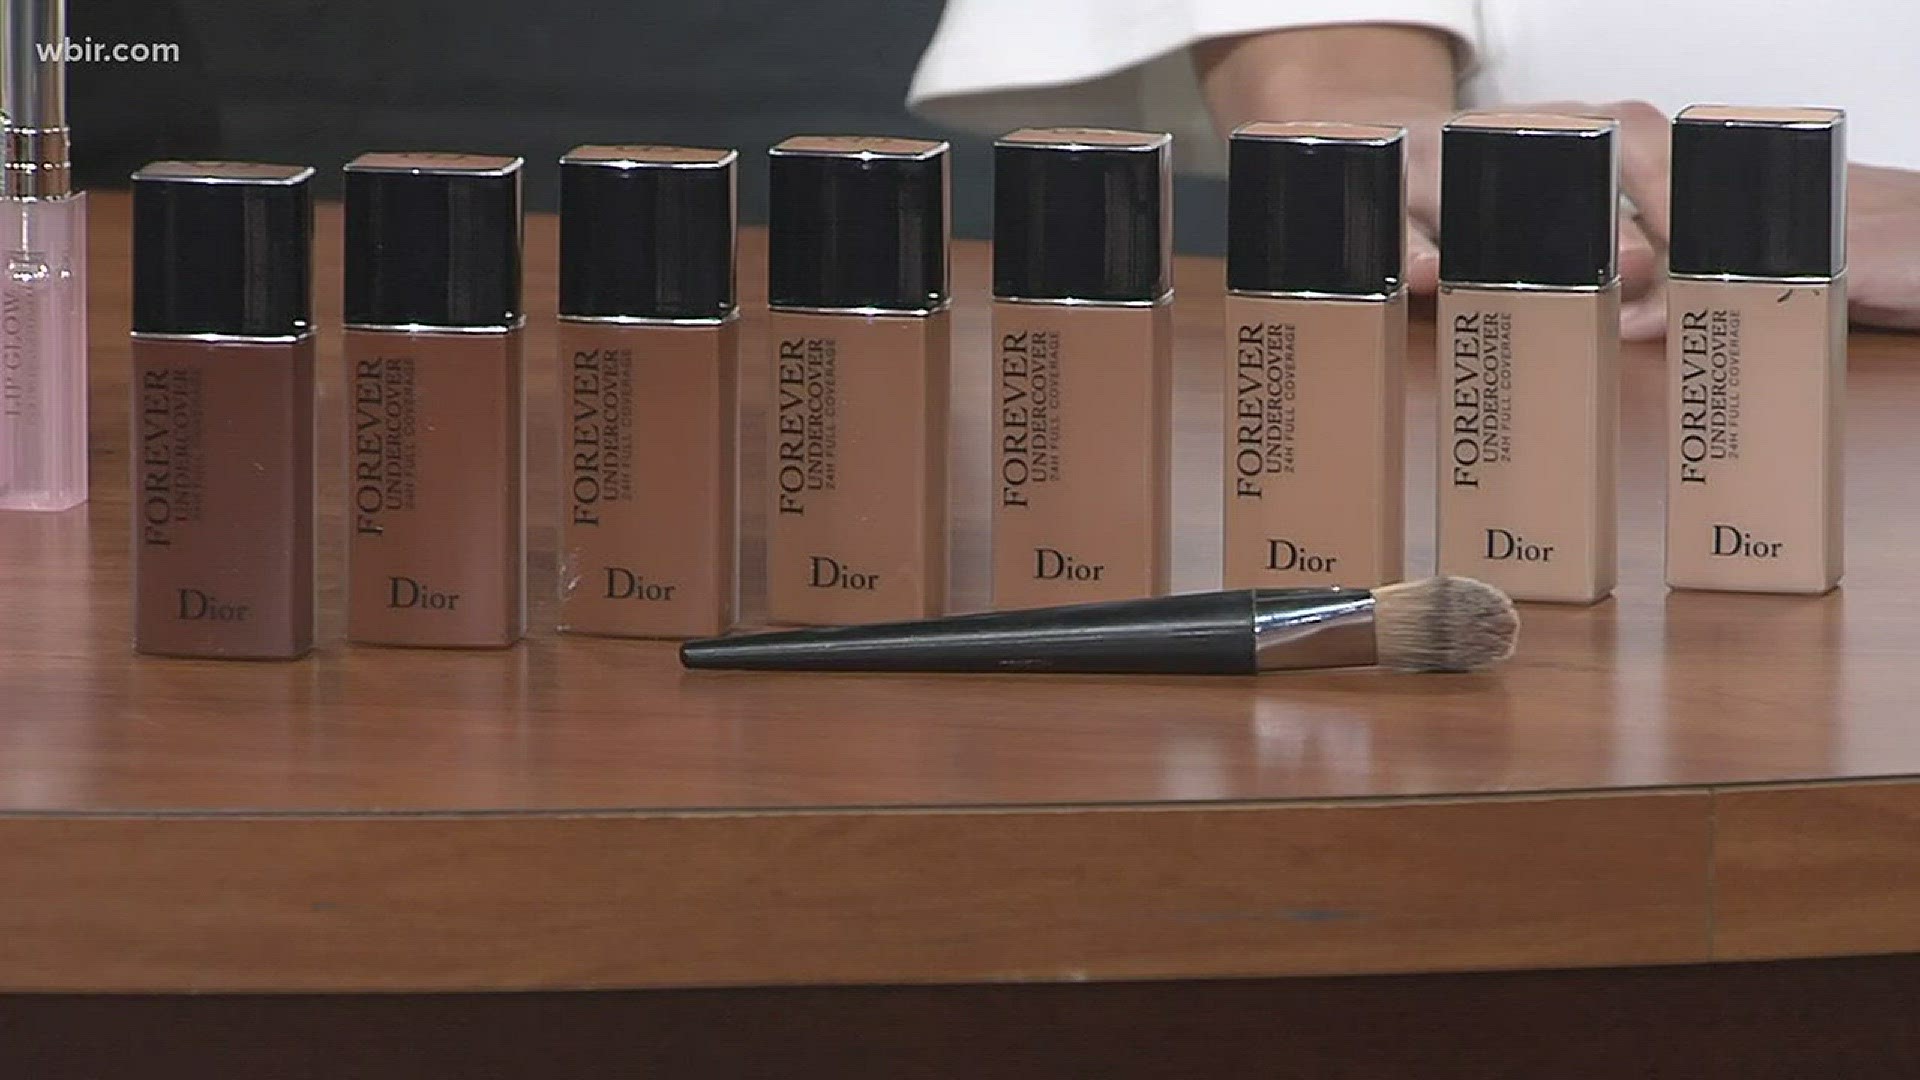 New Dior Products